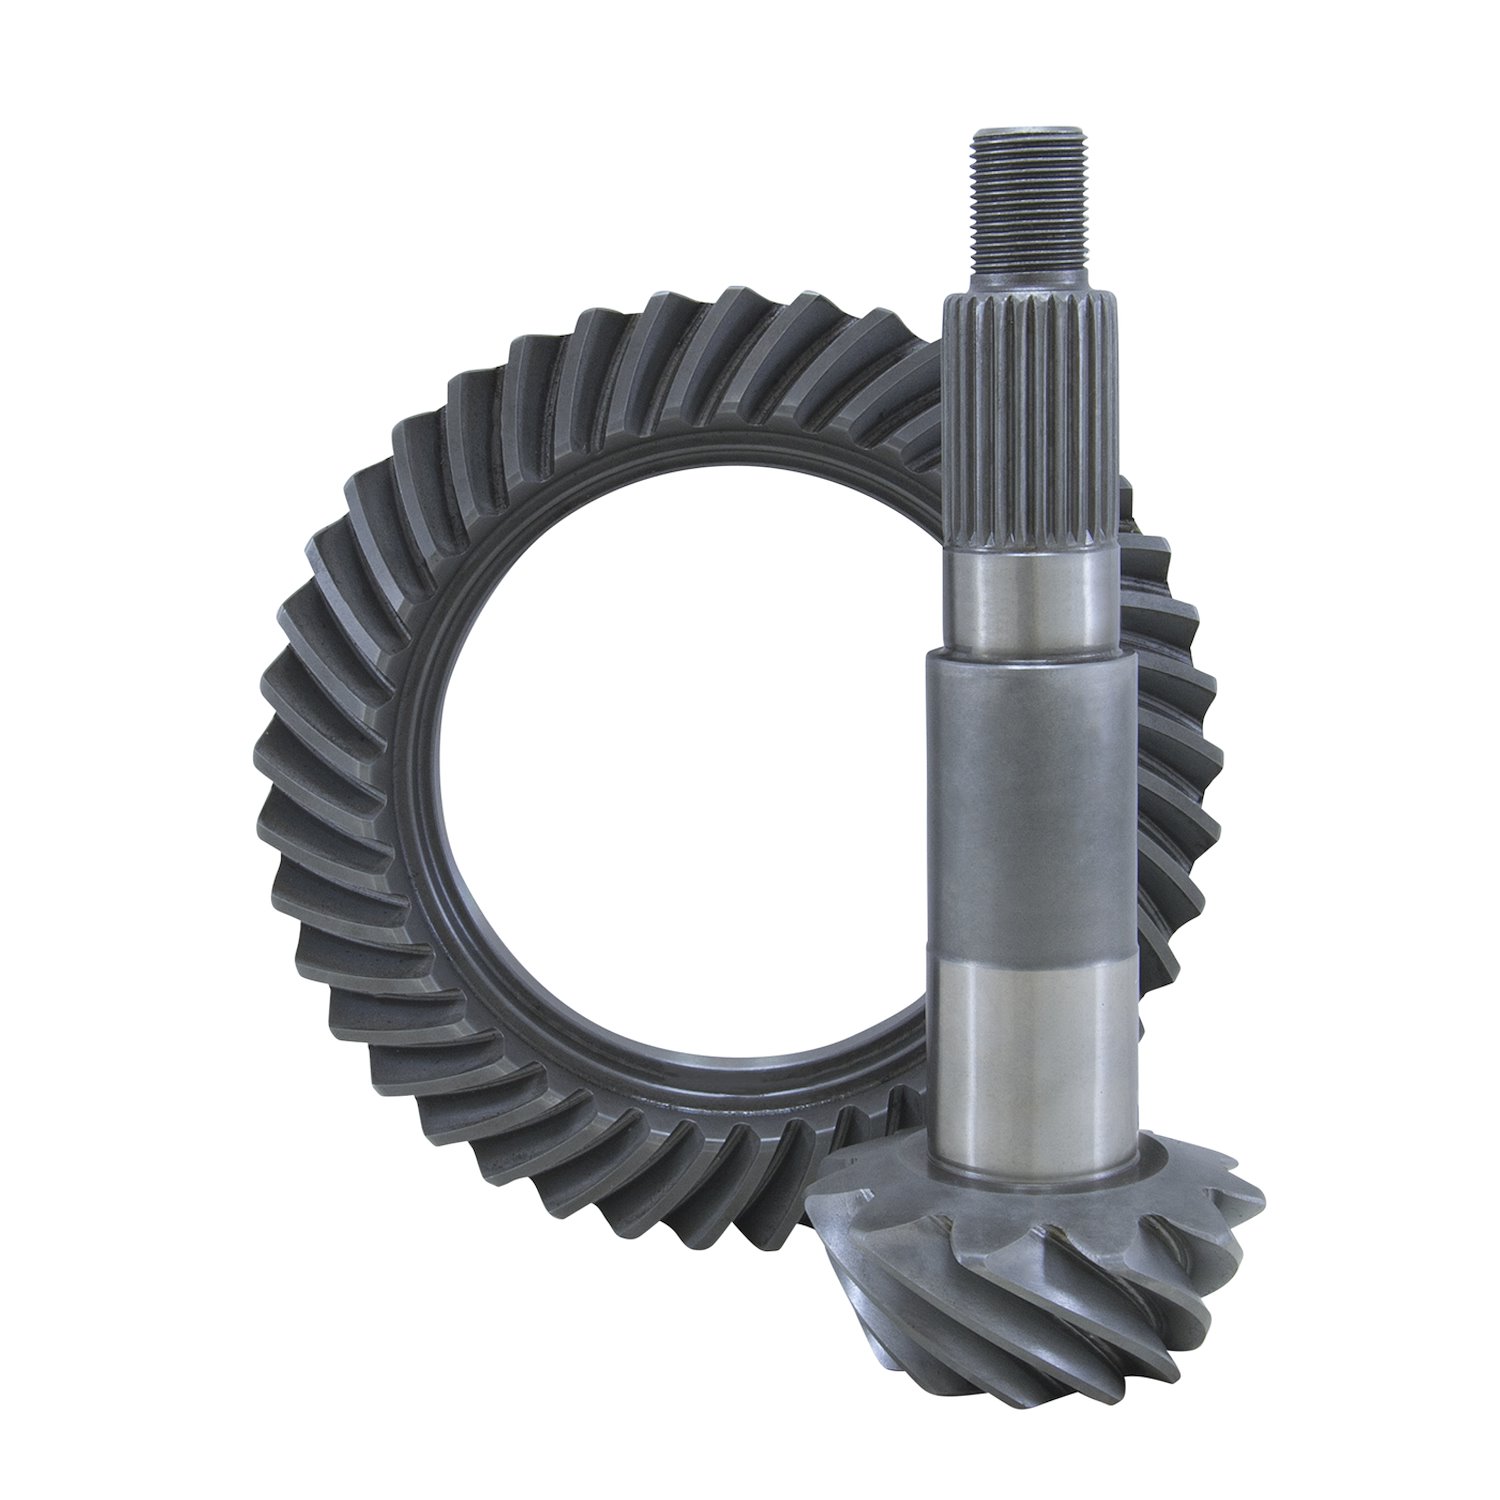 USA Standard ZG D30-456 Ring & Pinion Replacement